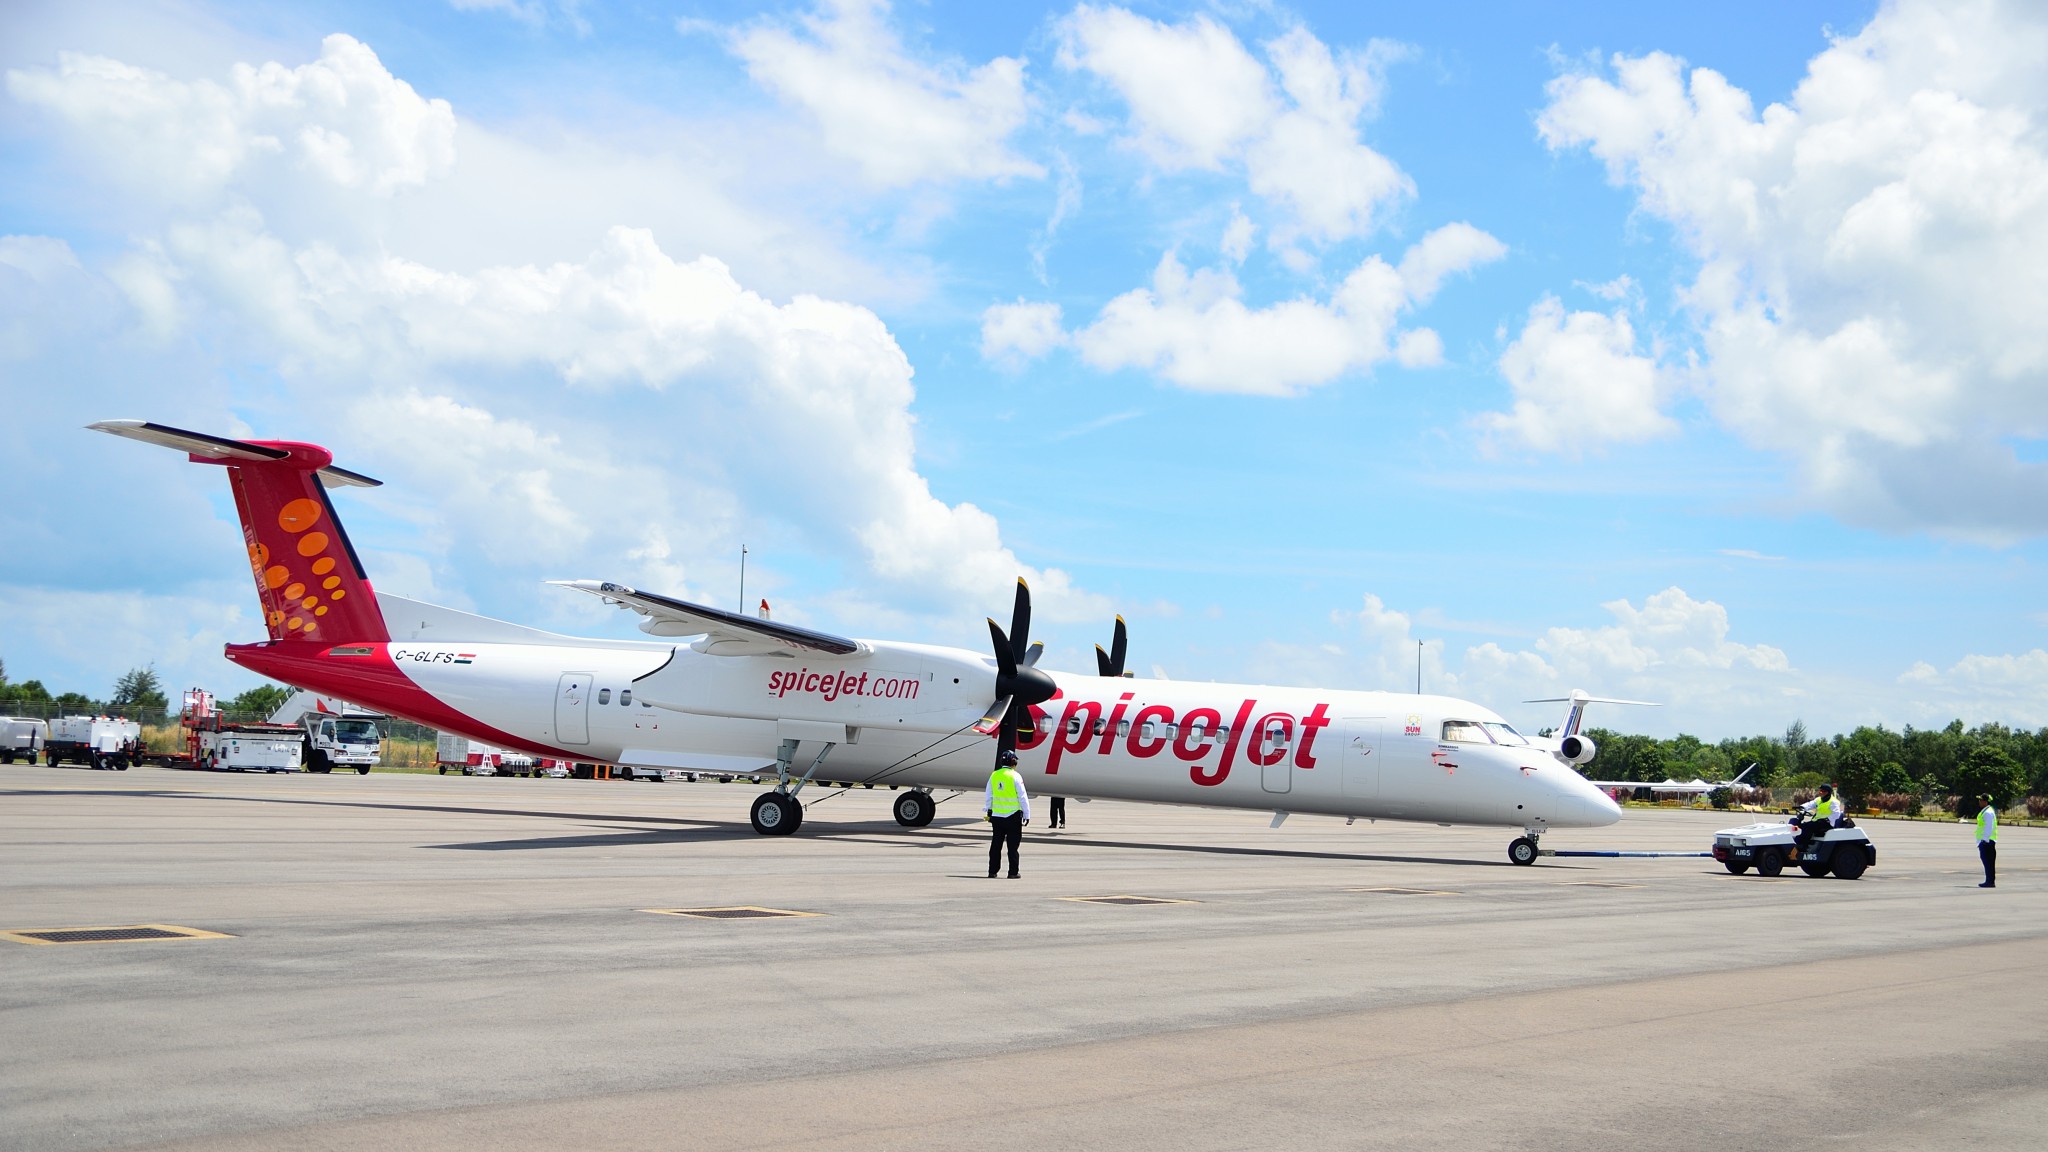 SpiceJet predicts strong year ahead after posting 22% profits jump